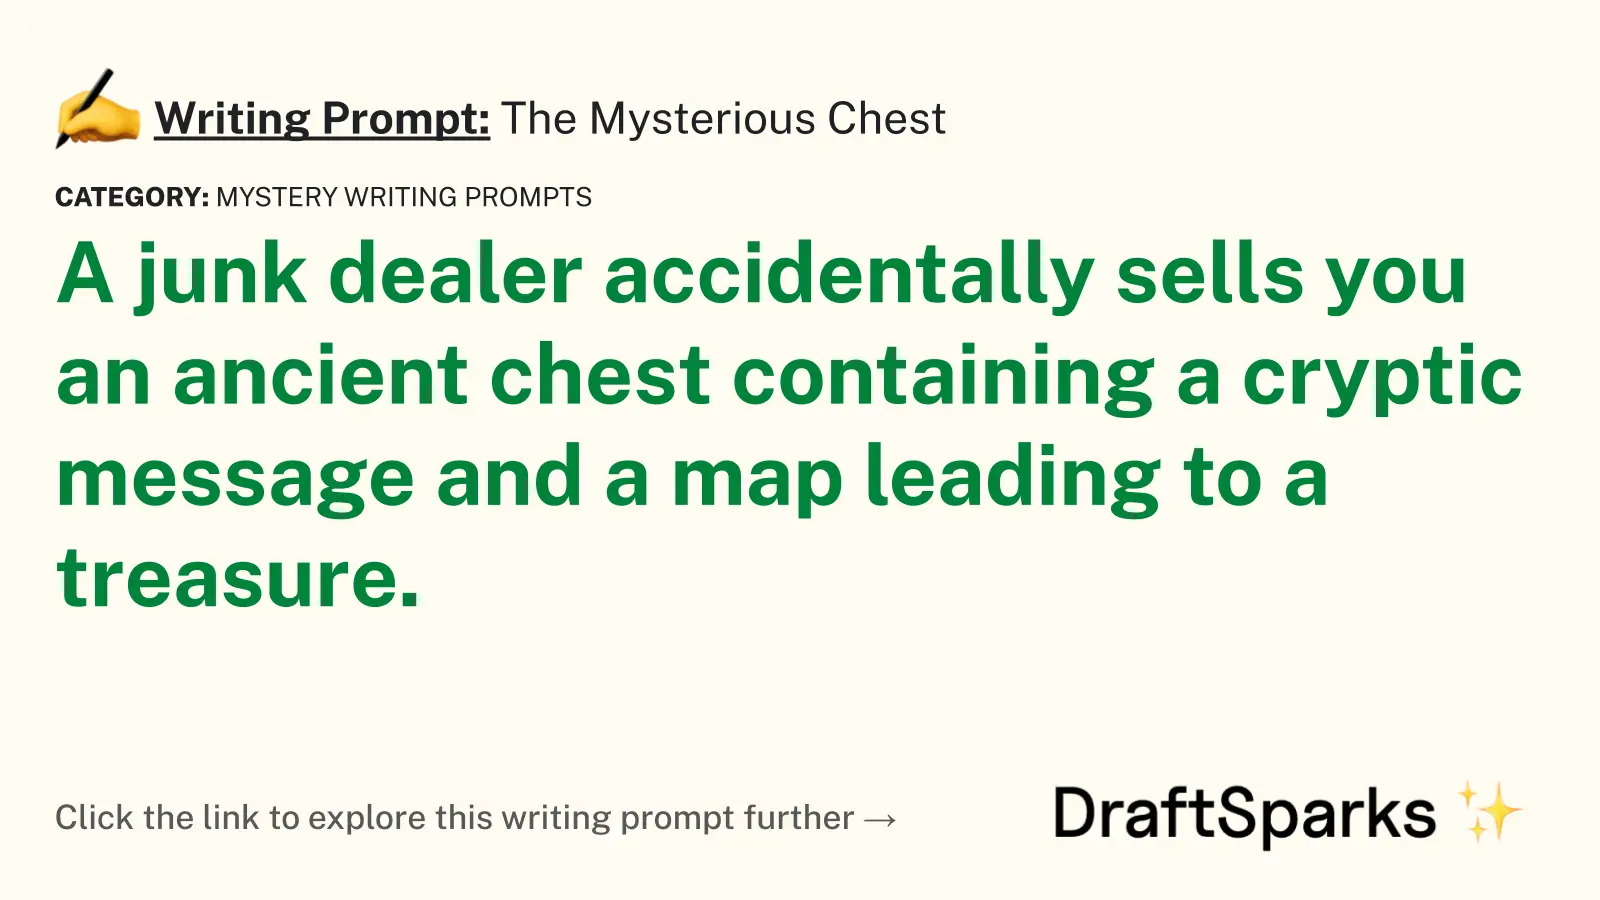 The Mysterious Chest